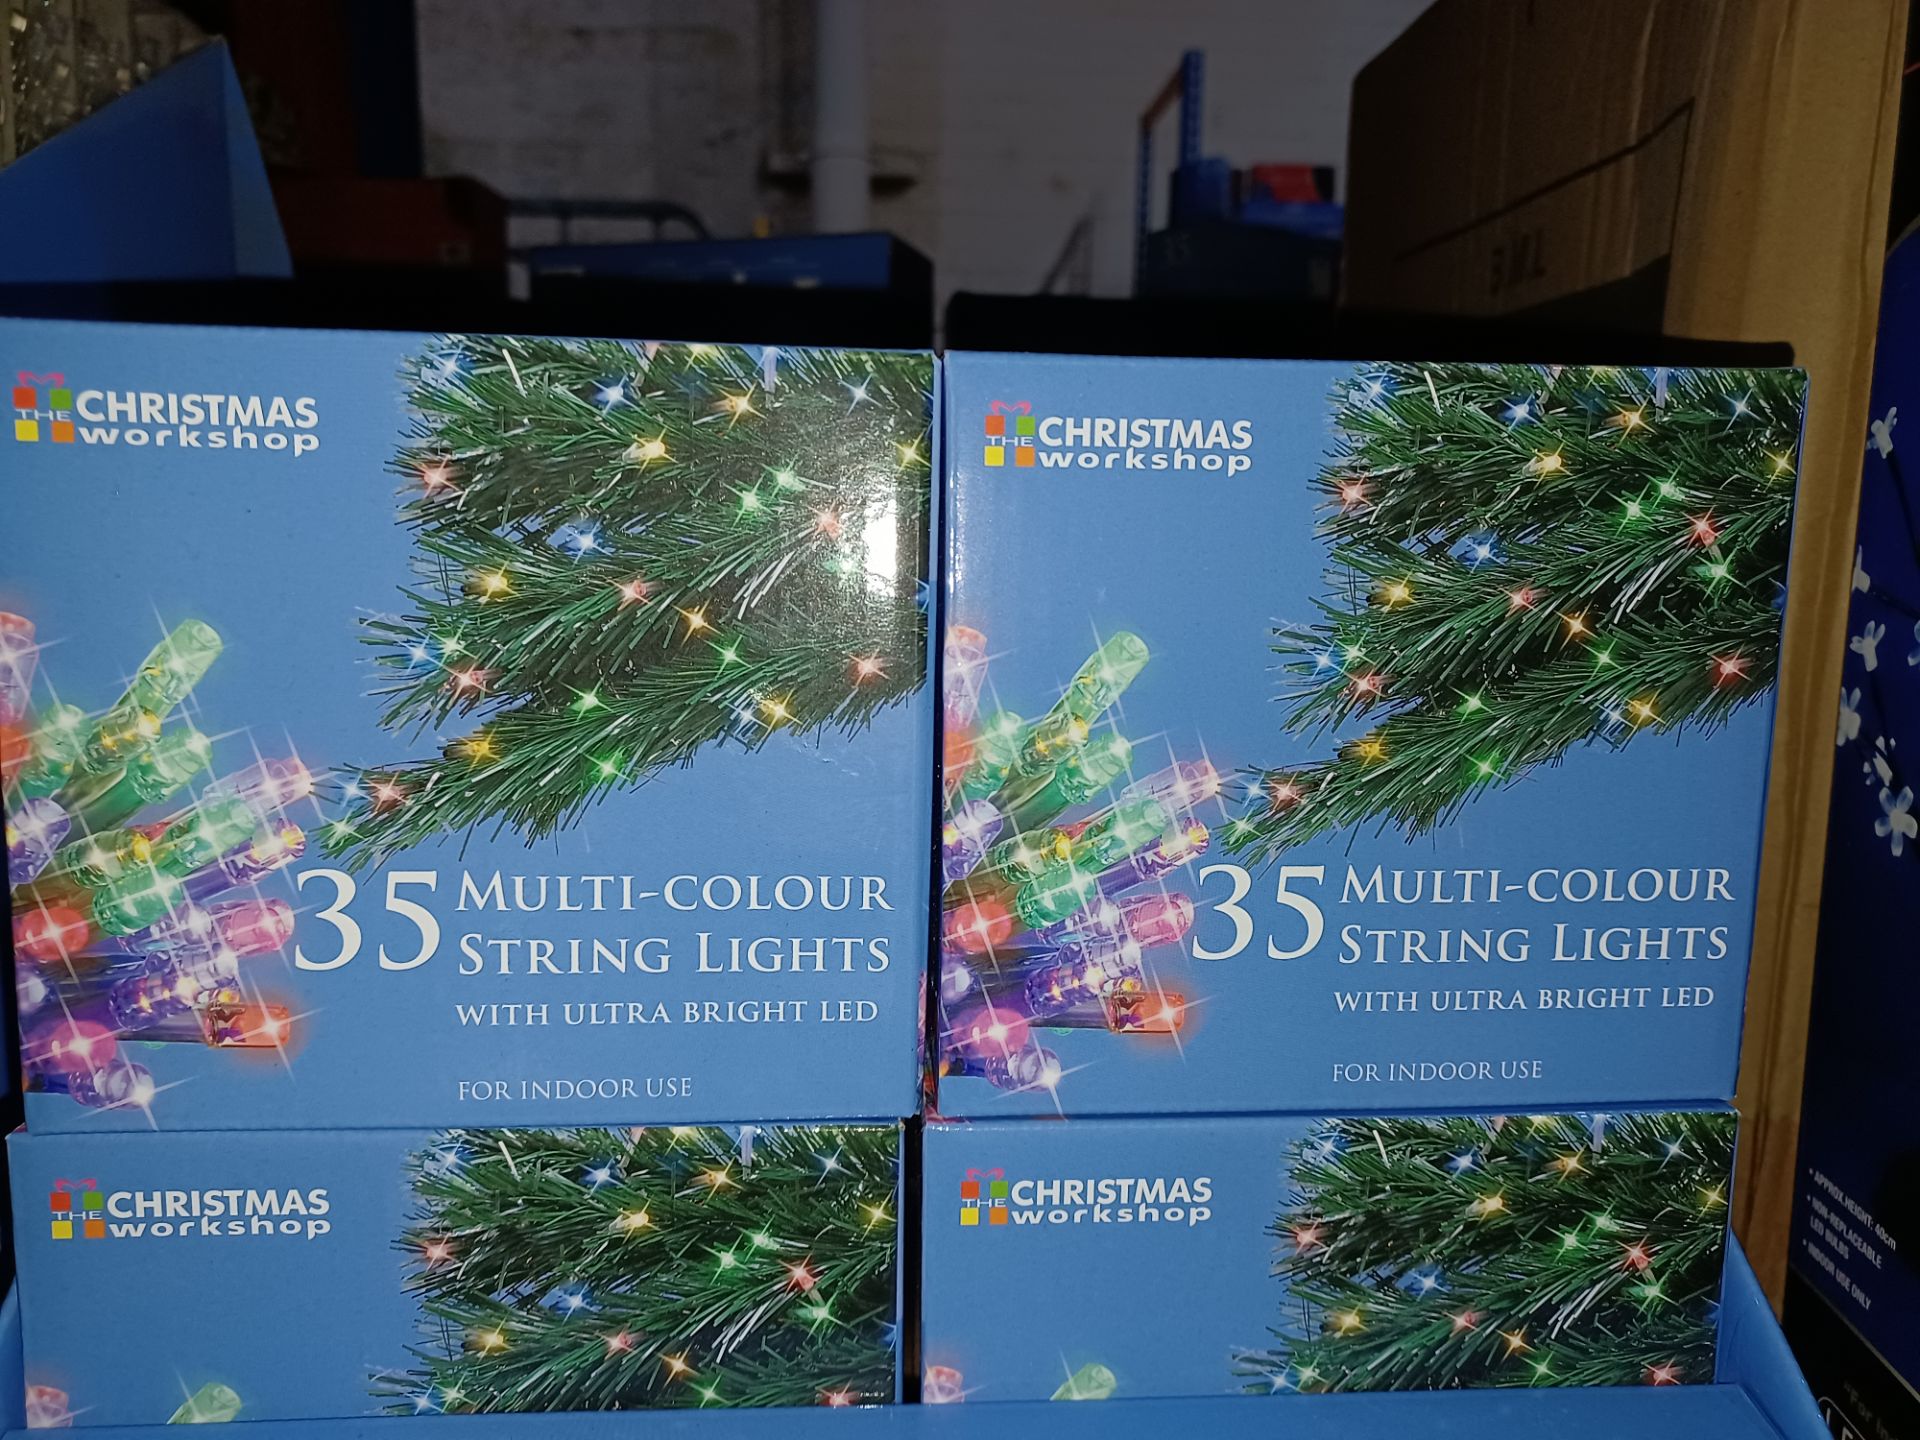 NEW BOXED 6 X MULTI COLOUR STRING LIGHTS WITH ULTRA BRIGHT LED FOR INDOOR USE LIGHT LENGTH 2.3M -